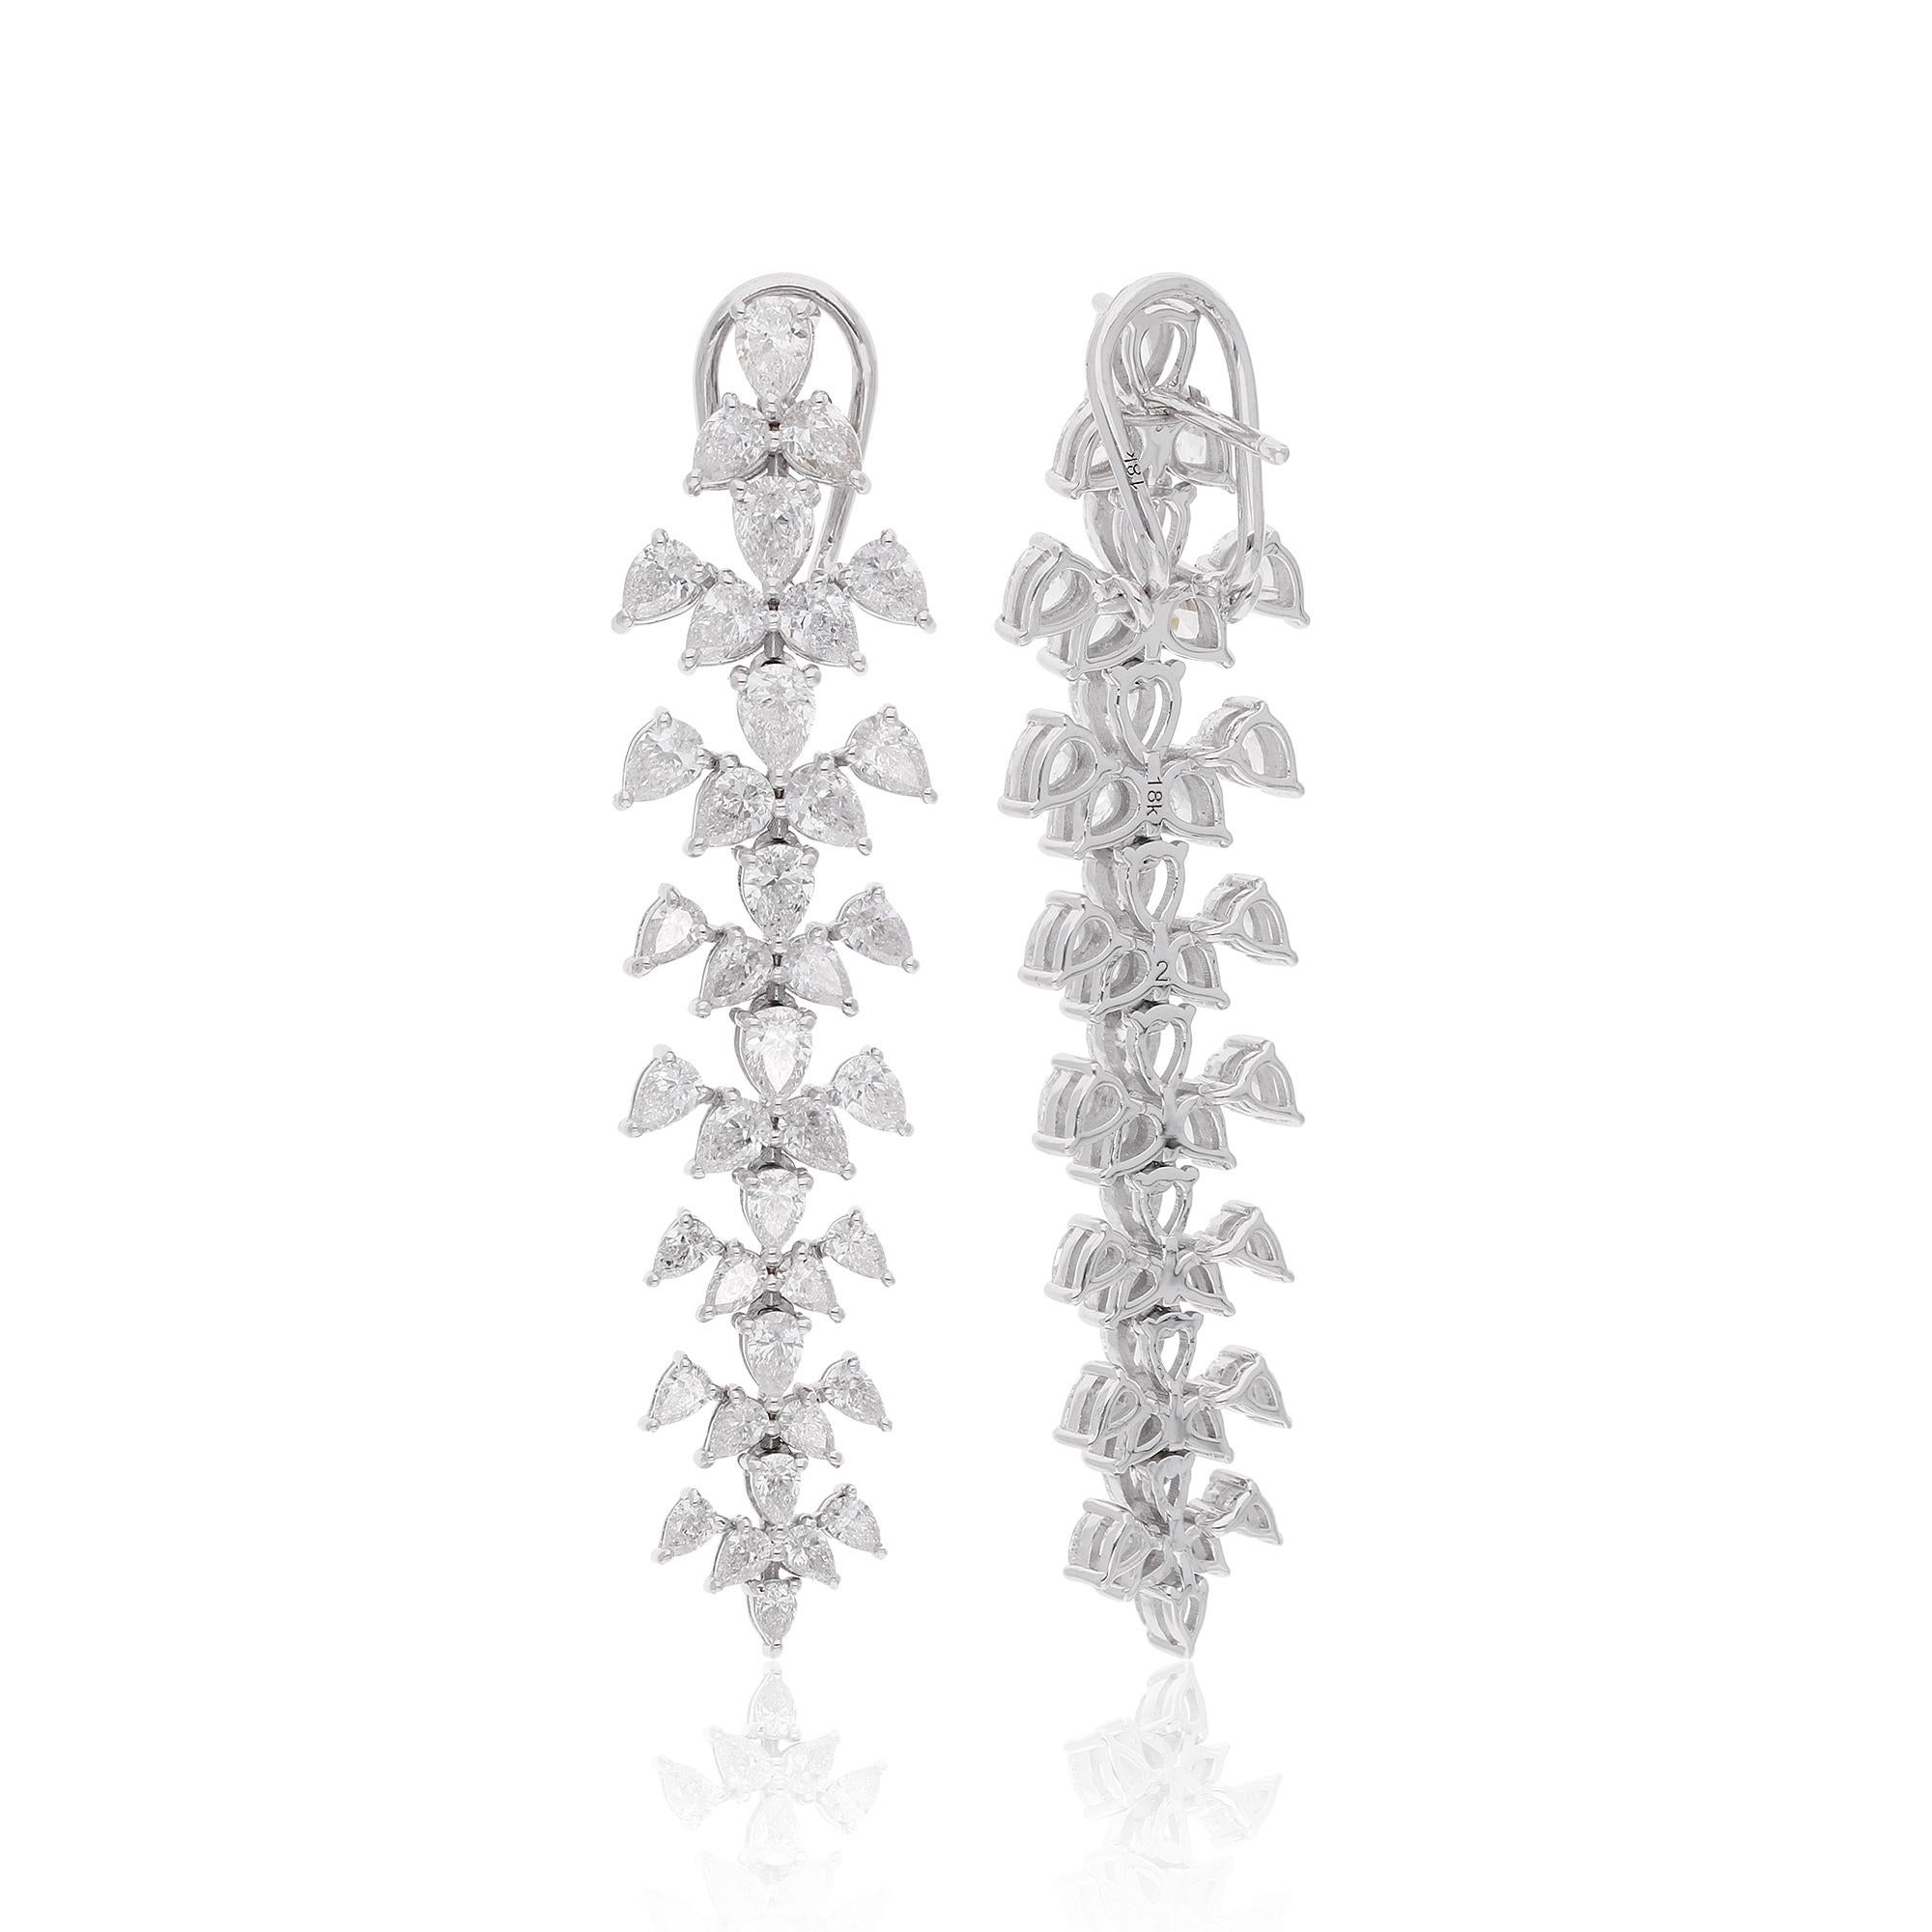 Simple and elegant, this 18k White Gold Diamond studded Earrings will make your look fashionable and classy. Its classy shine and flawless finish enhances its majestic charm and makes it more adorable.

✧✧Welcome To Our Shop Spectrum Jewels